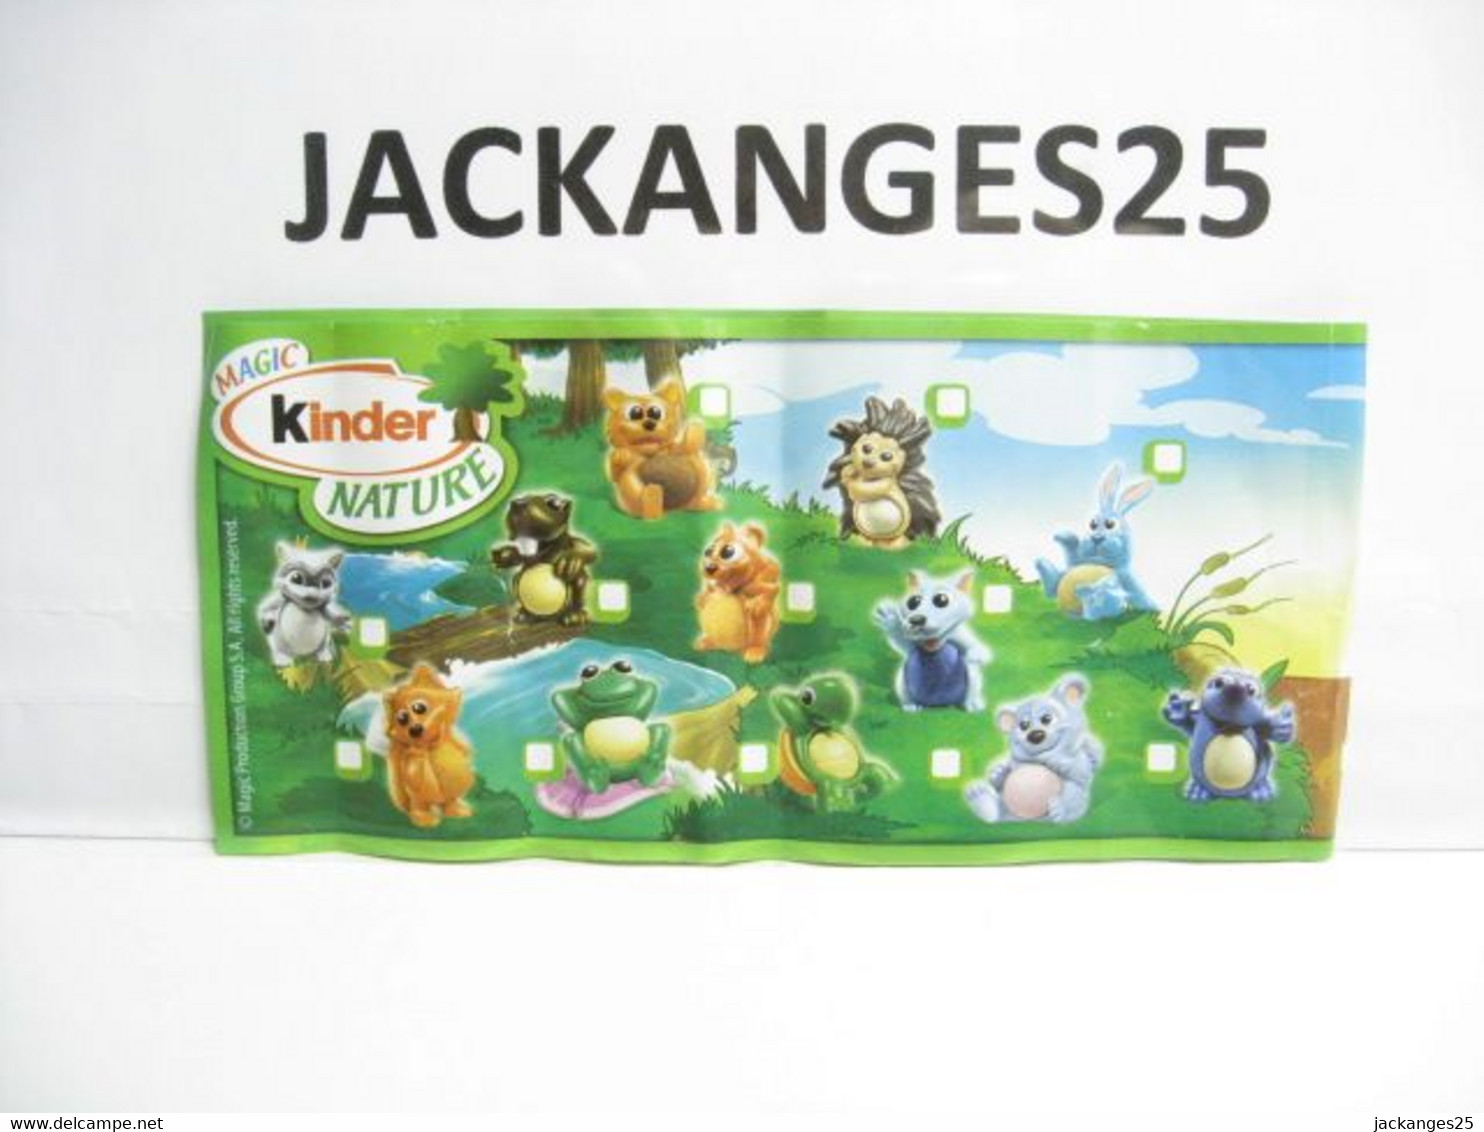 KINDER MPG UN 20 B TORTUE ANIMAUX NATURE NATOONS TIERE 2010  2011 + BPZ B NATURE - Families